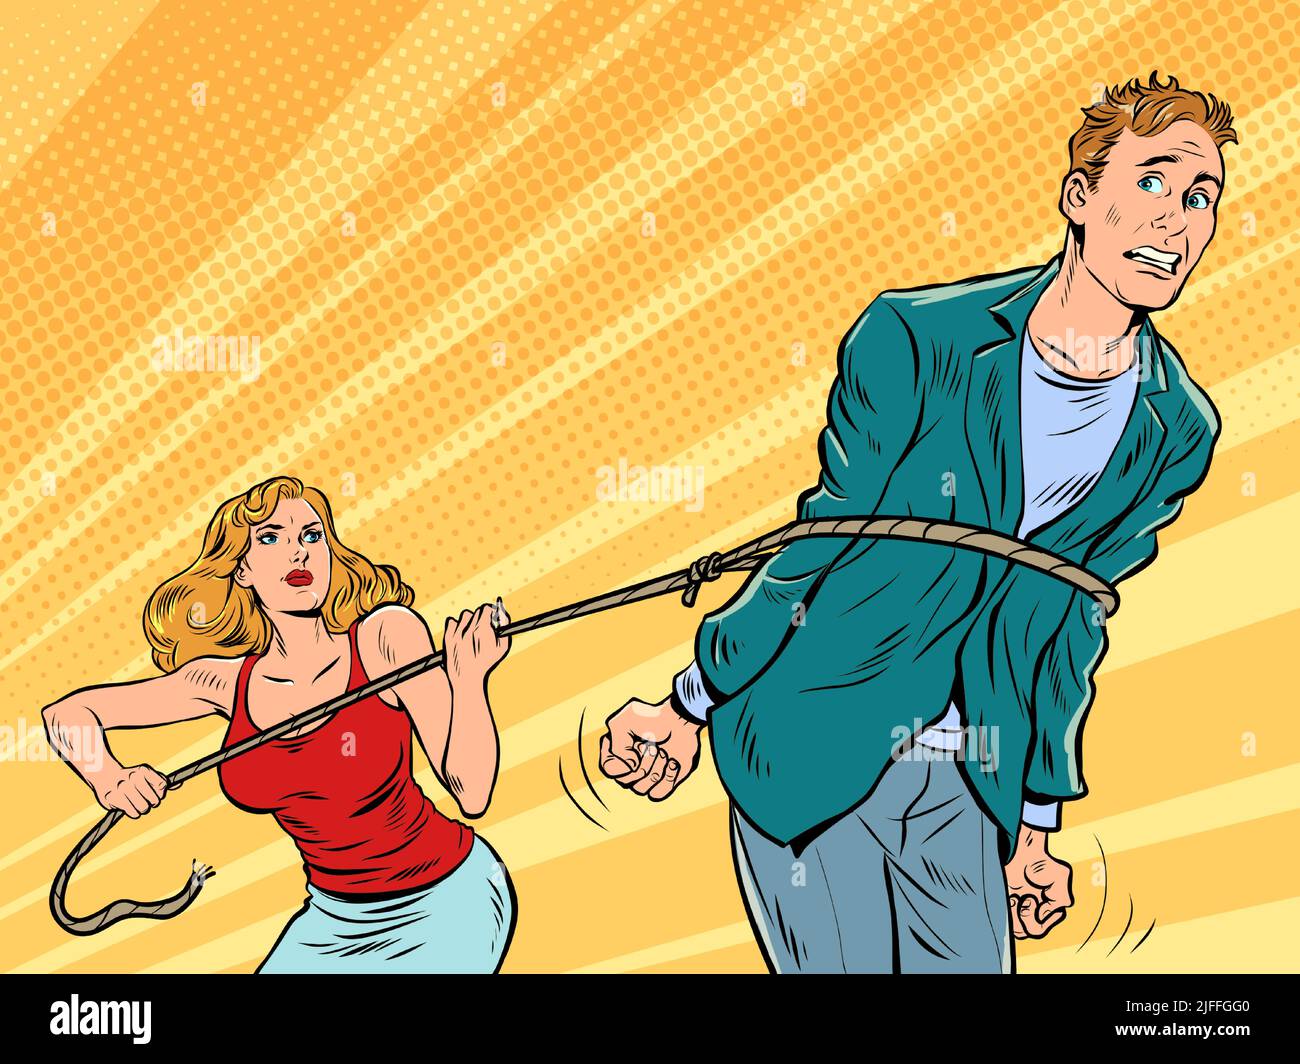 the woman lassoed the man, the girl threw a noose on the man and took him prisoner Stock Vector